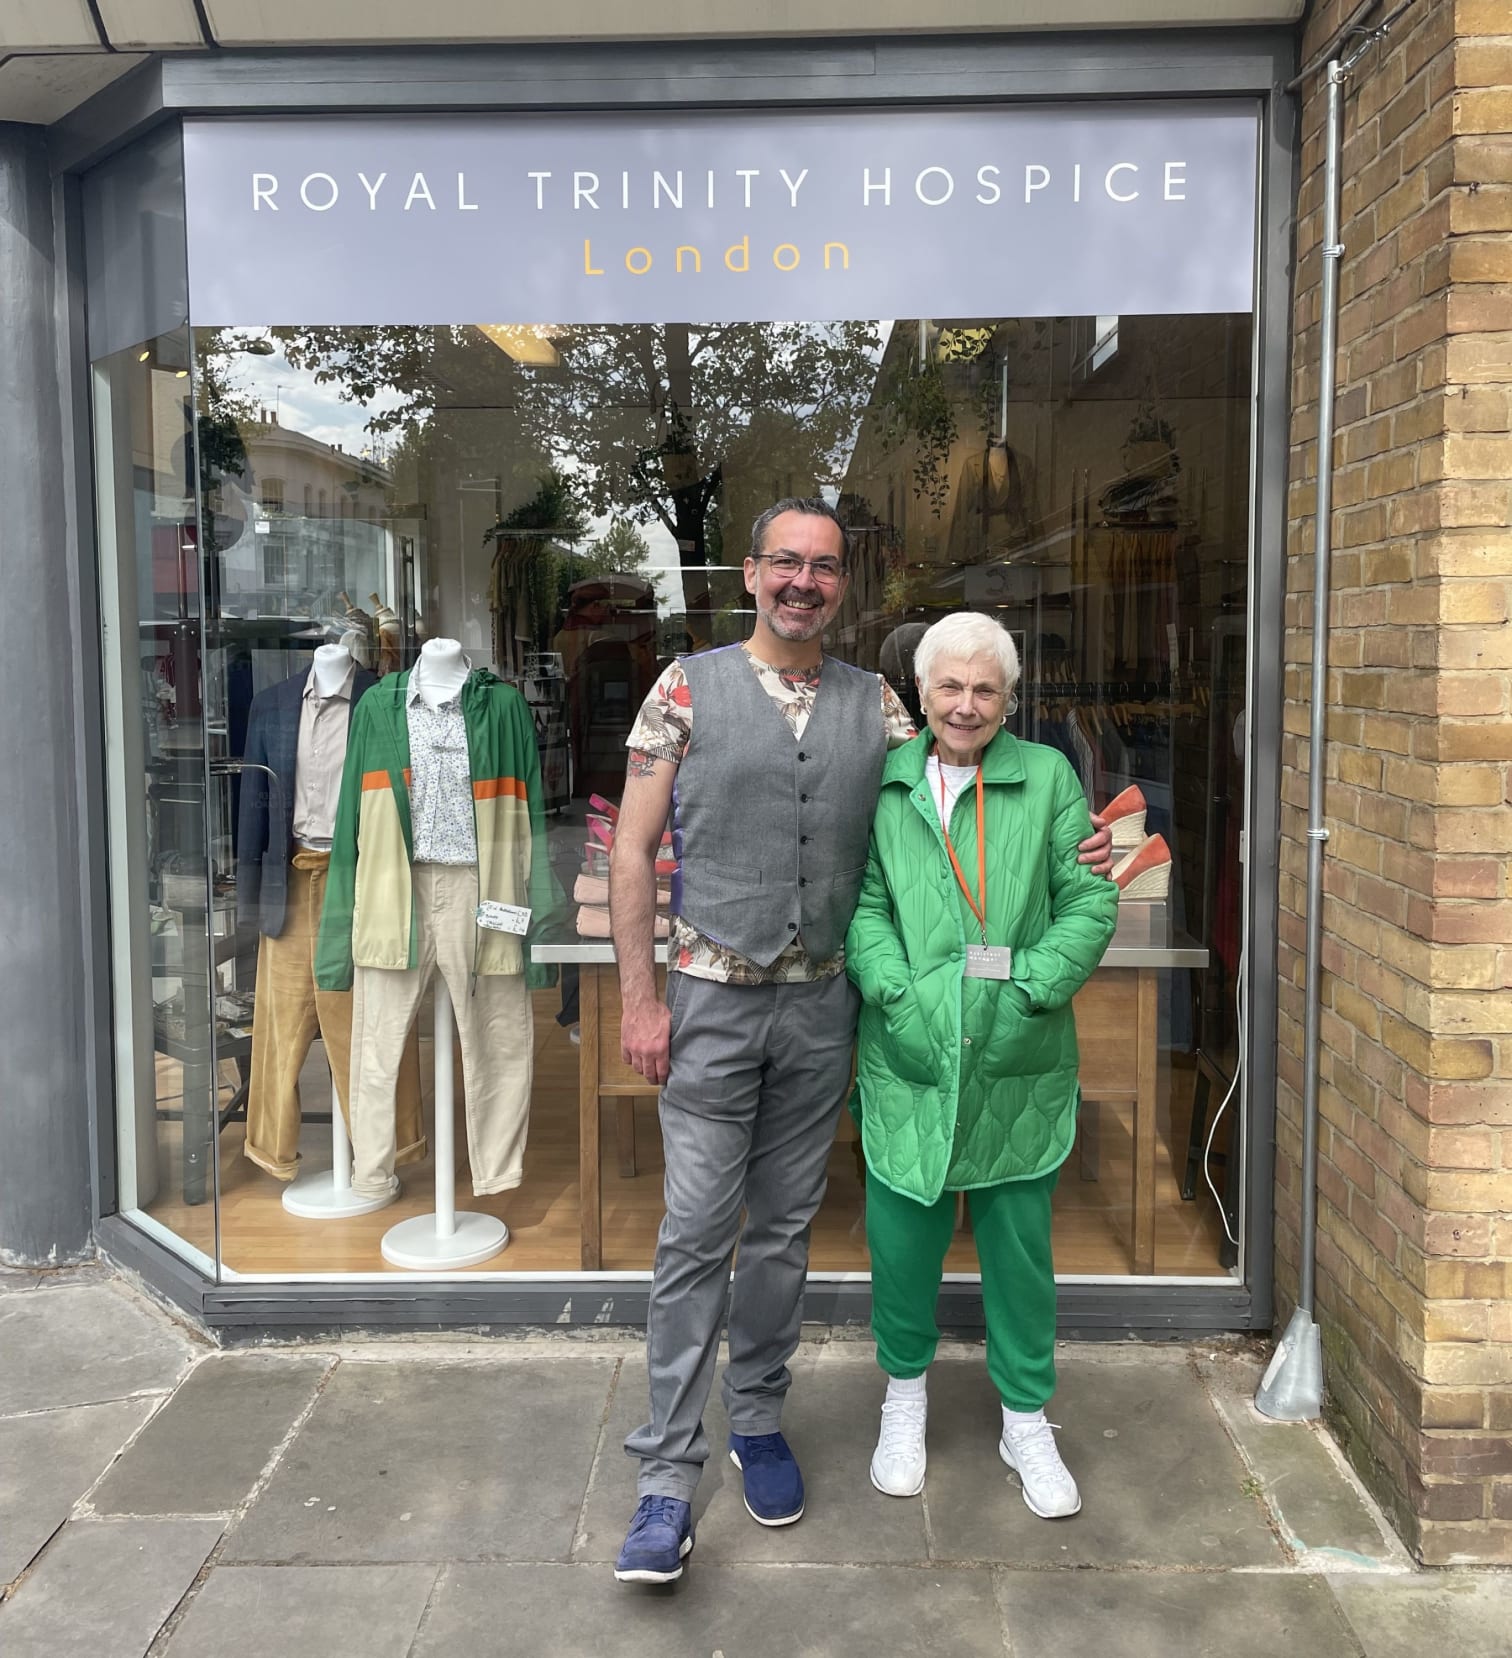 Man in a suit and woman in an all green outfit stood in front of a Trinity shop